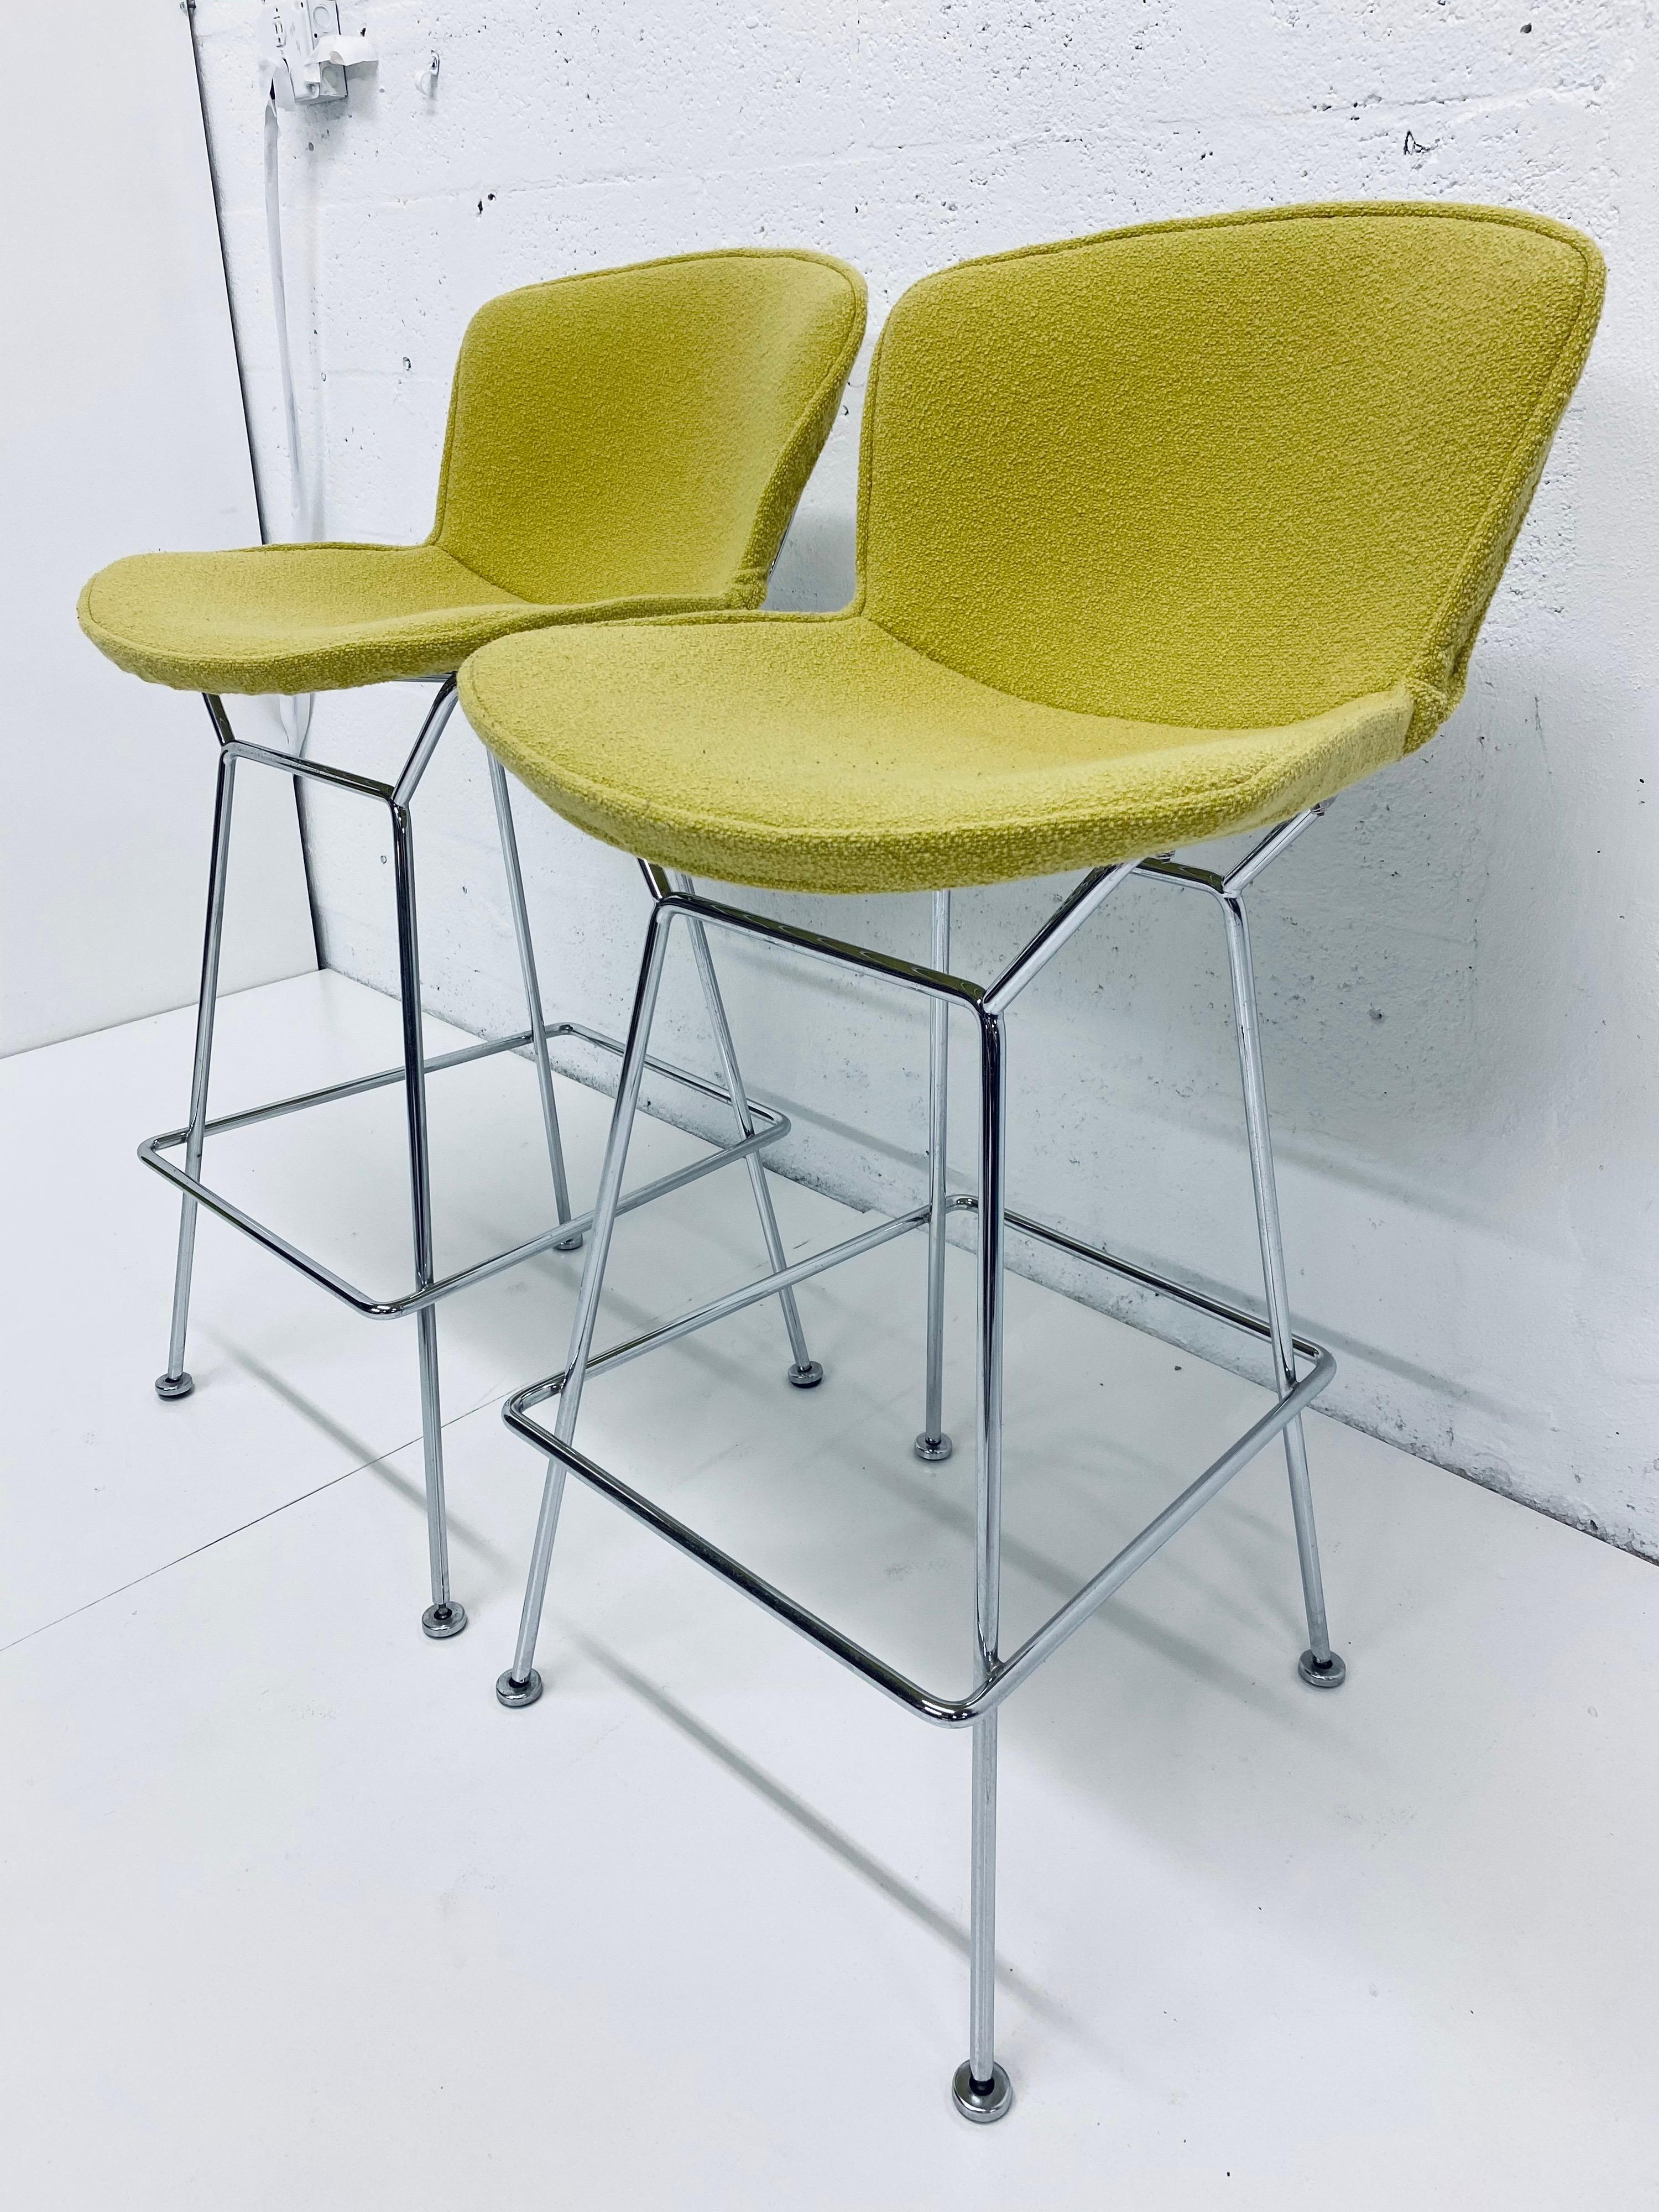 Iconic set of two bar stools by Harry Bertoia for Knoll International. Chrome frames with original citron yellow covers. United States, 1970s. Stamped Knoll on frame.